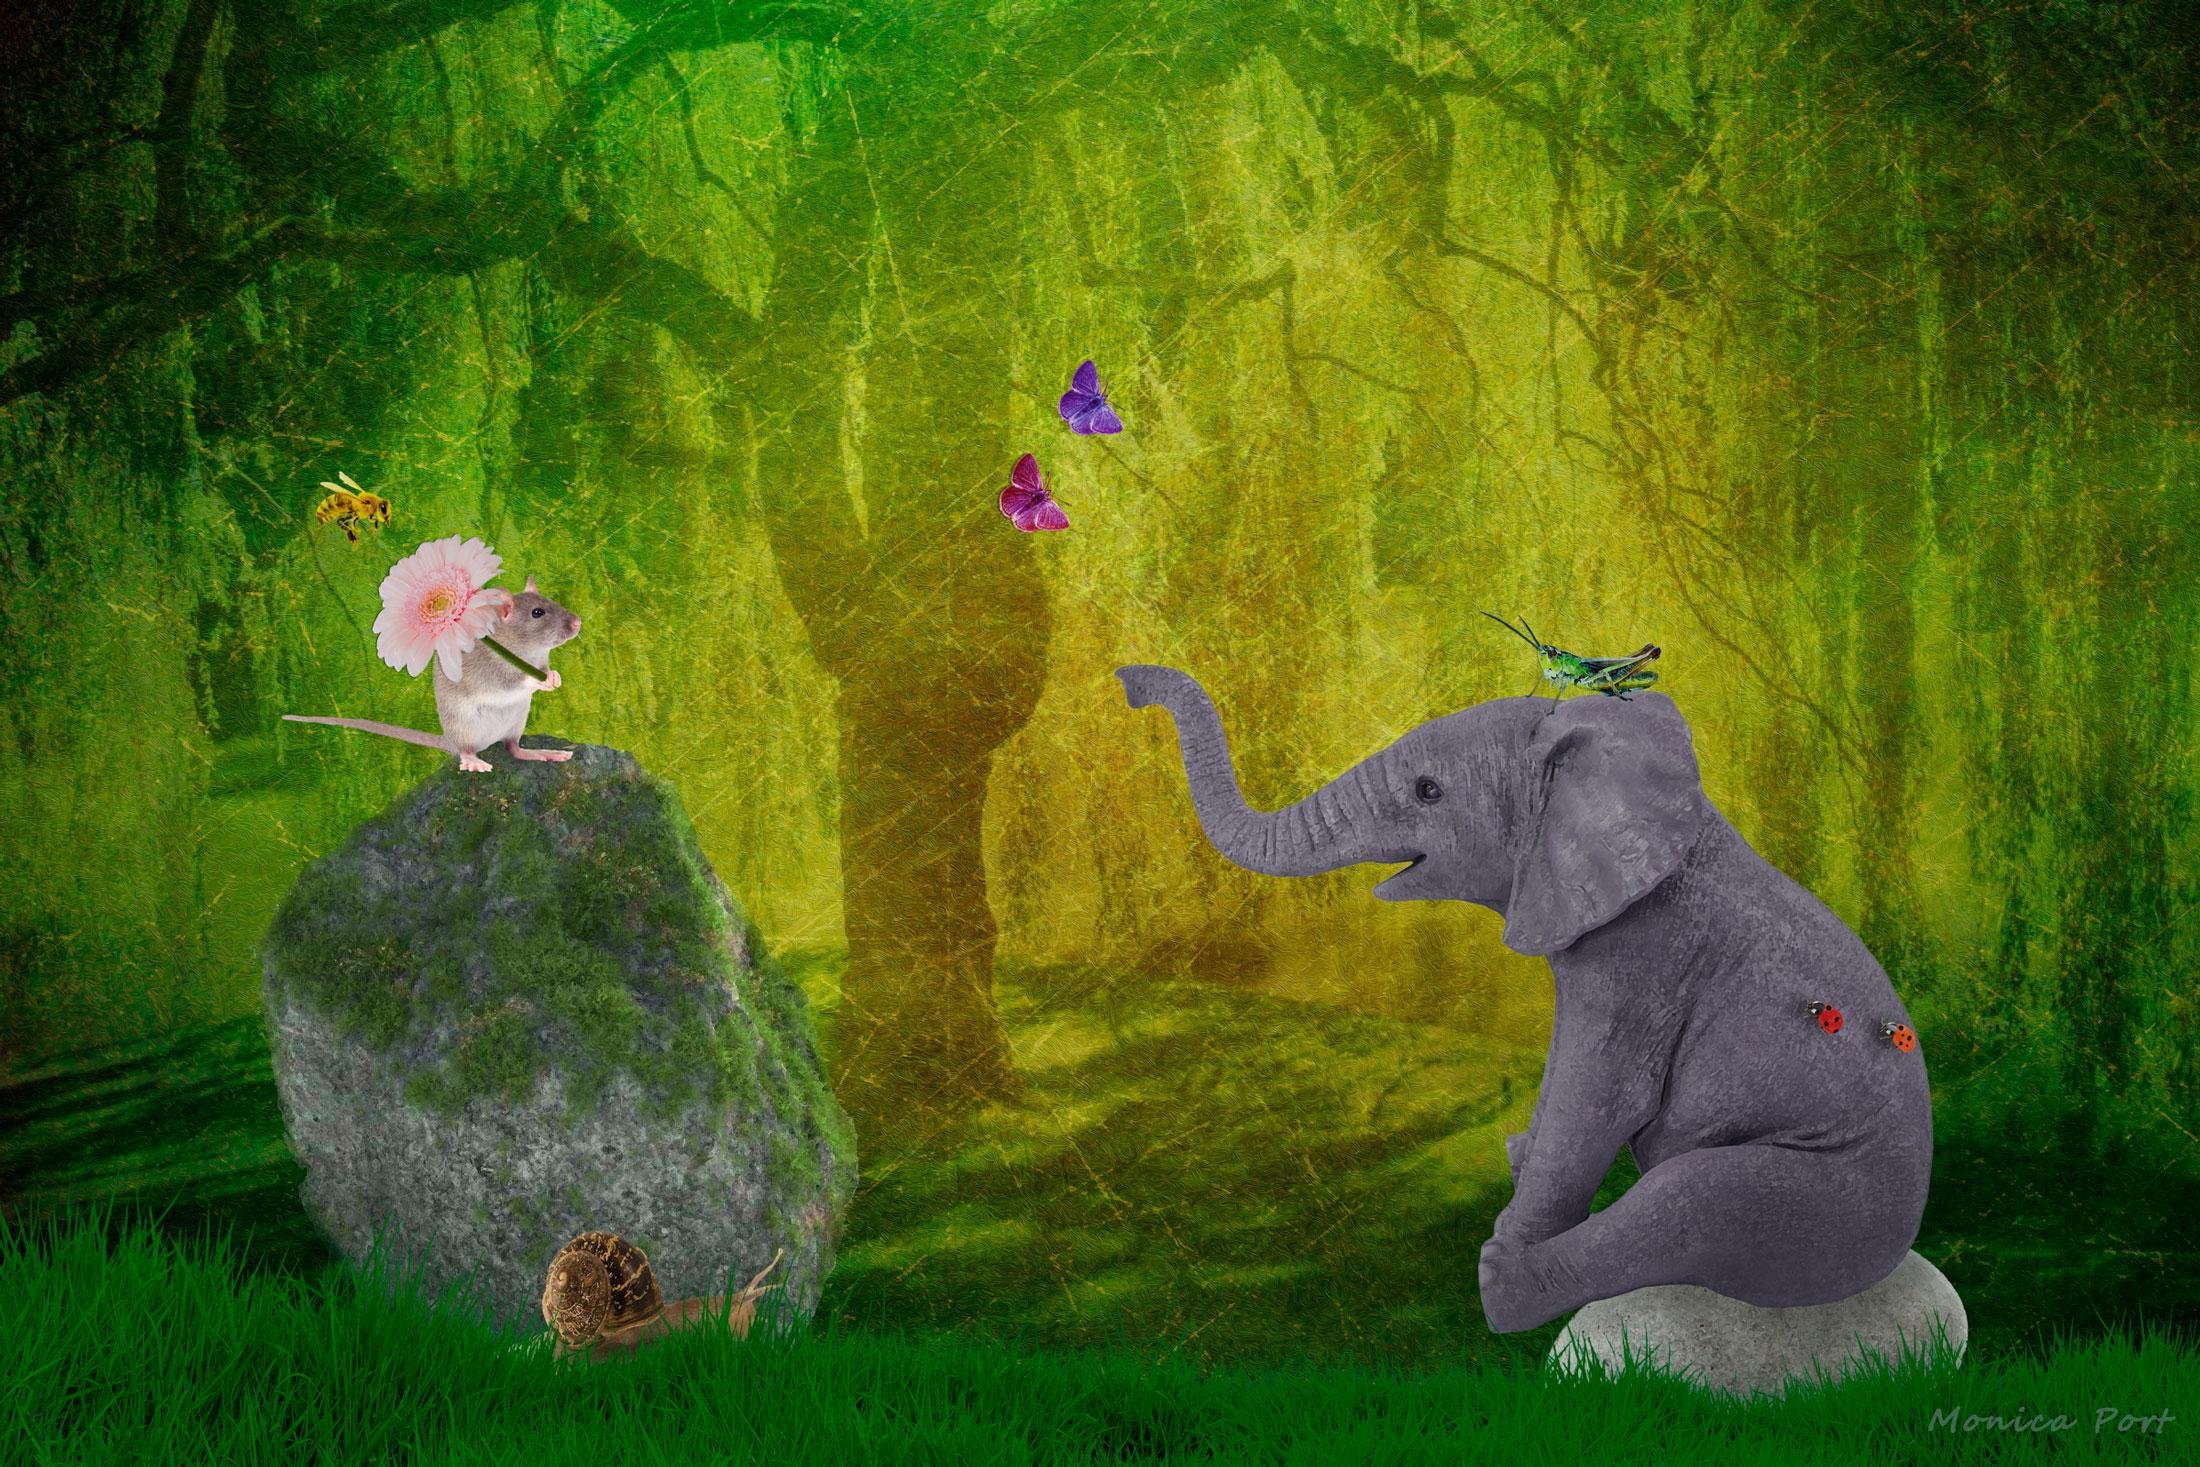 Elephant, Mouse, and Snail in Forest (by Monica Port)